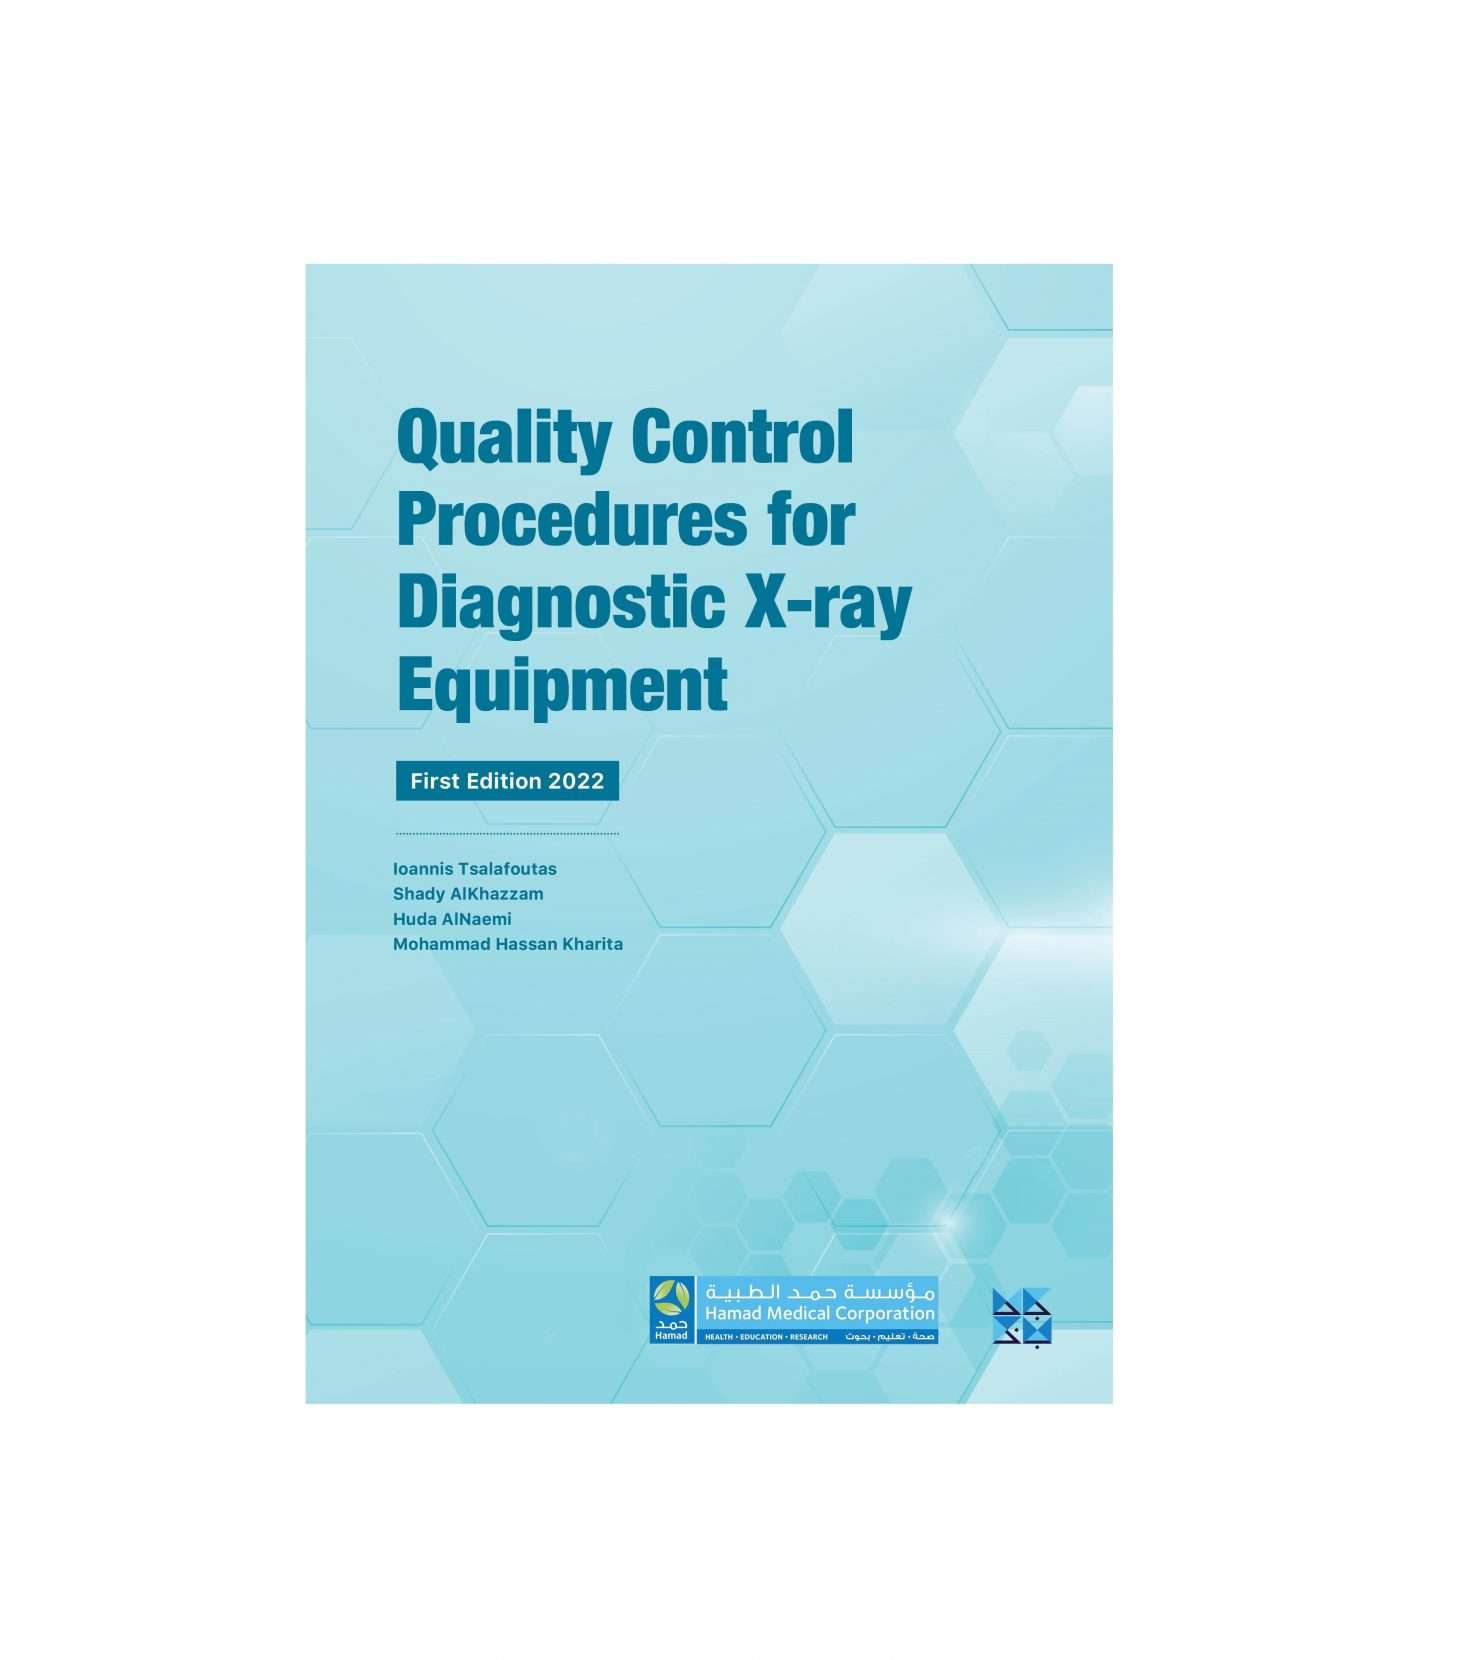 Quality Control Procedures for Diagnostic X-ray Equipment